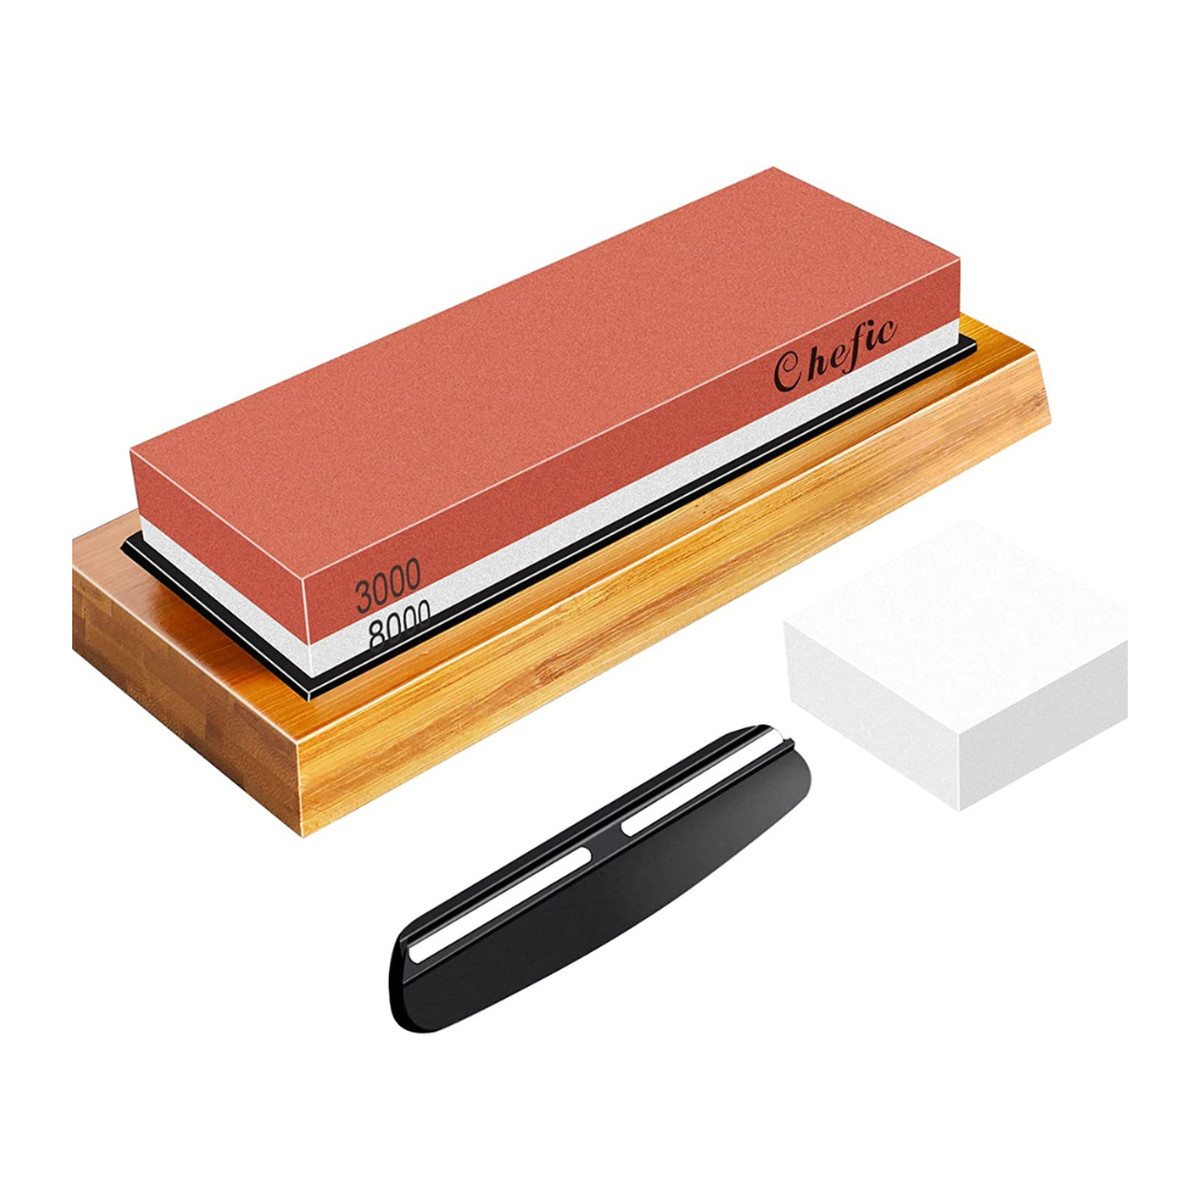 Chefic Sharpening Stone with accessories